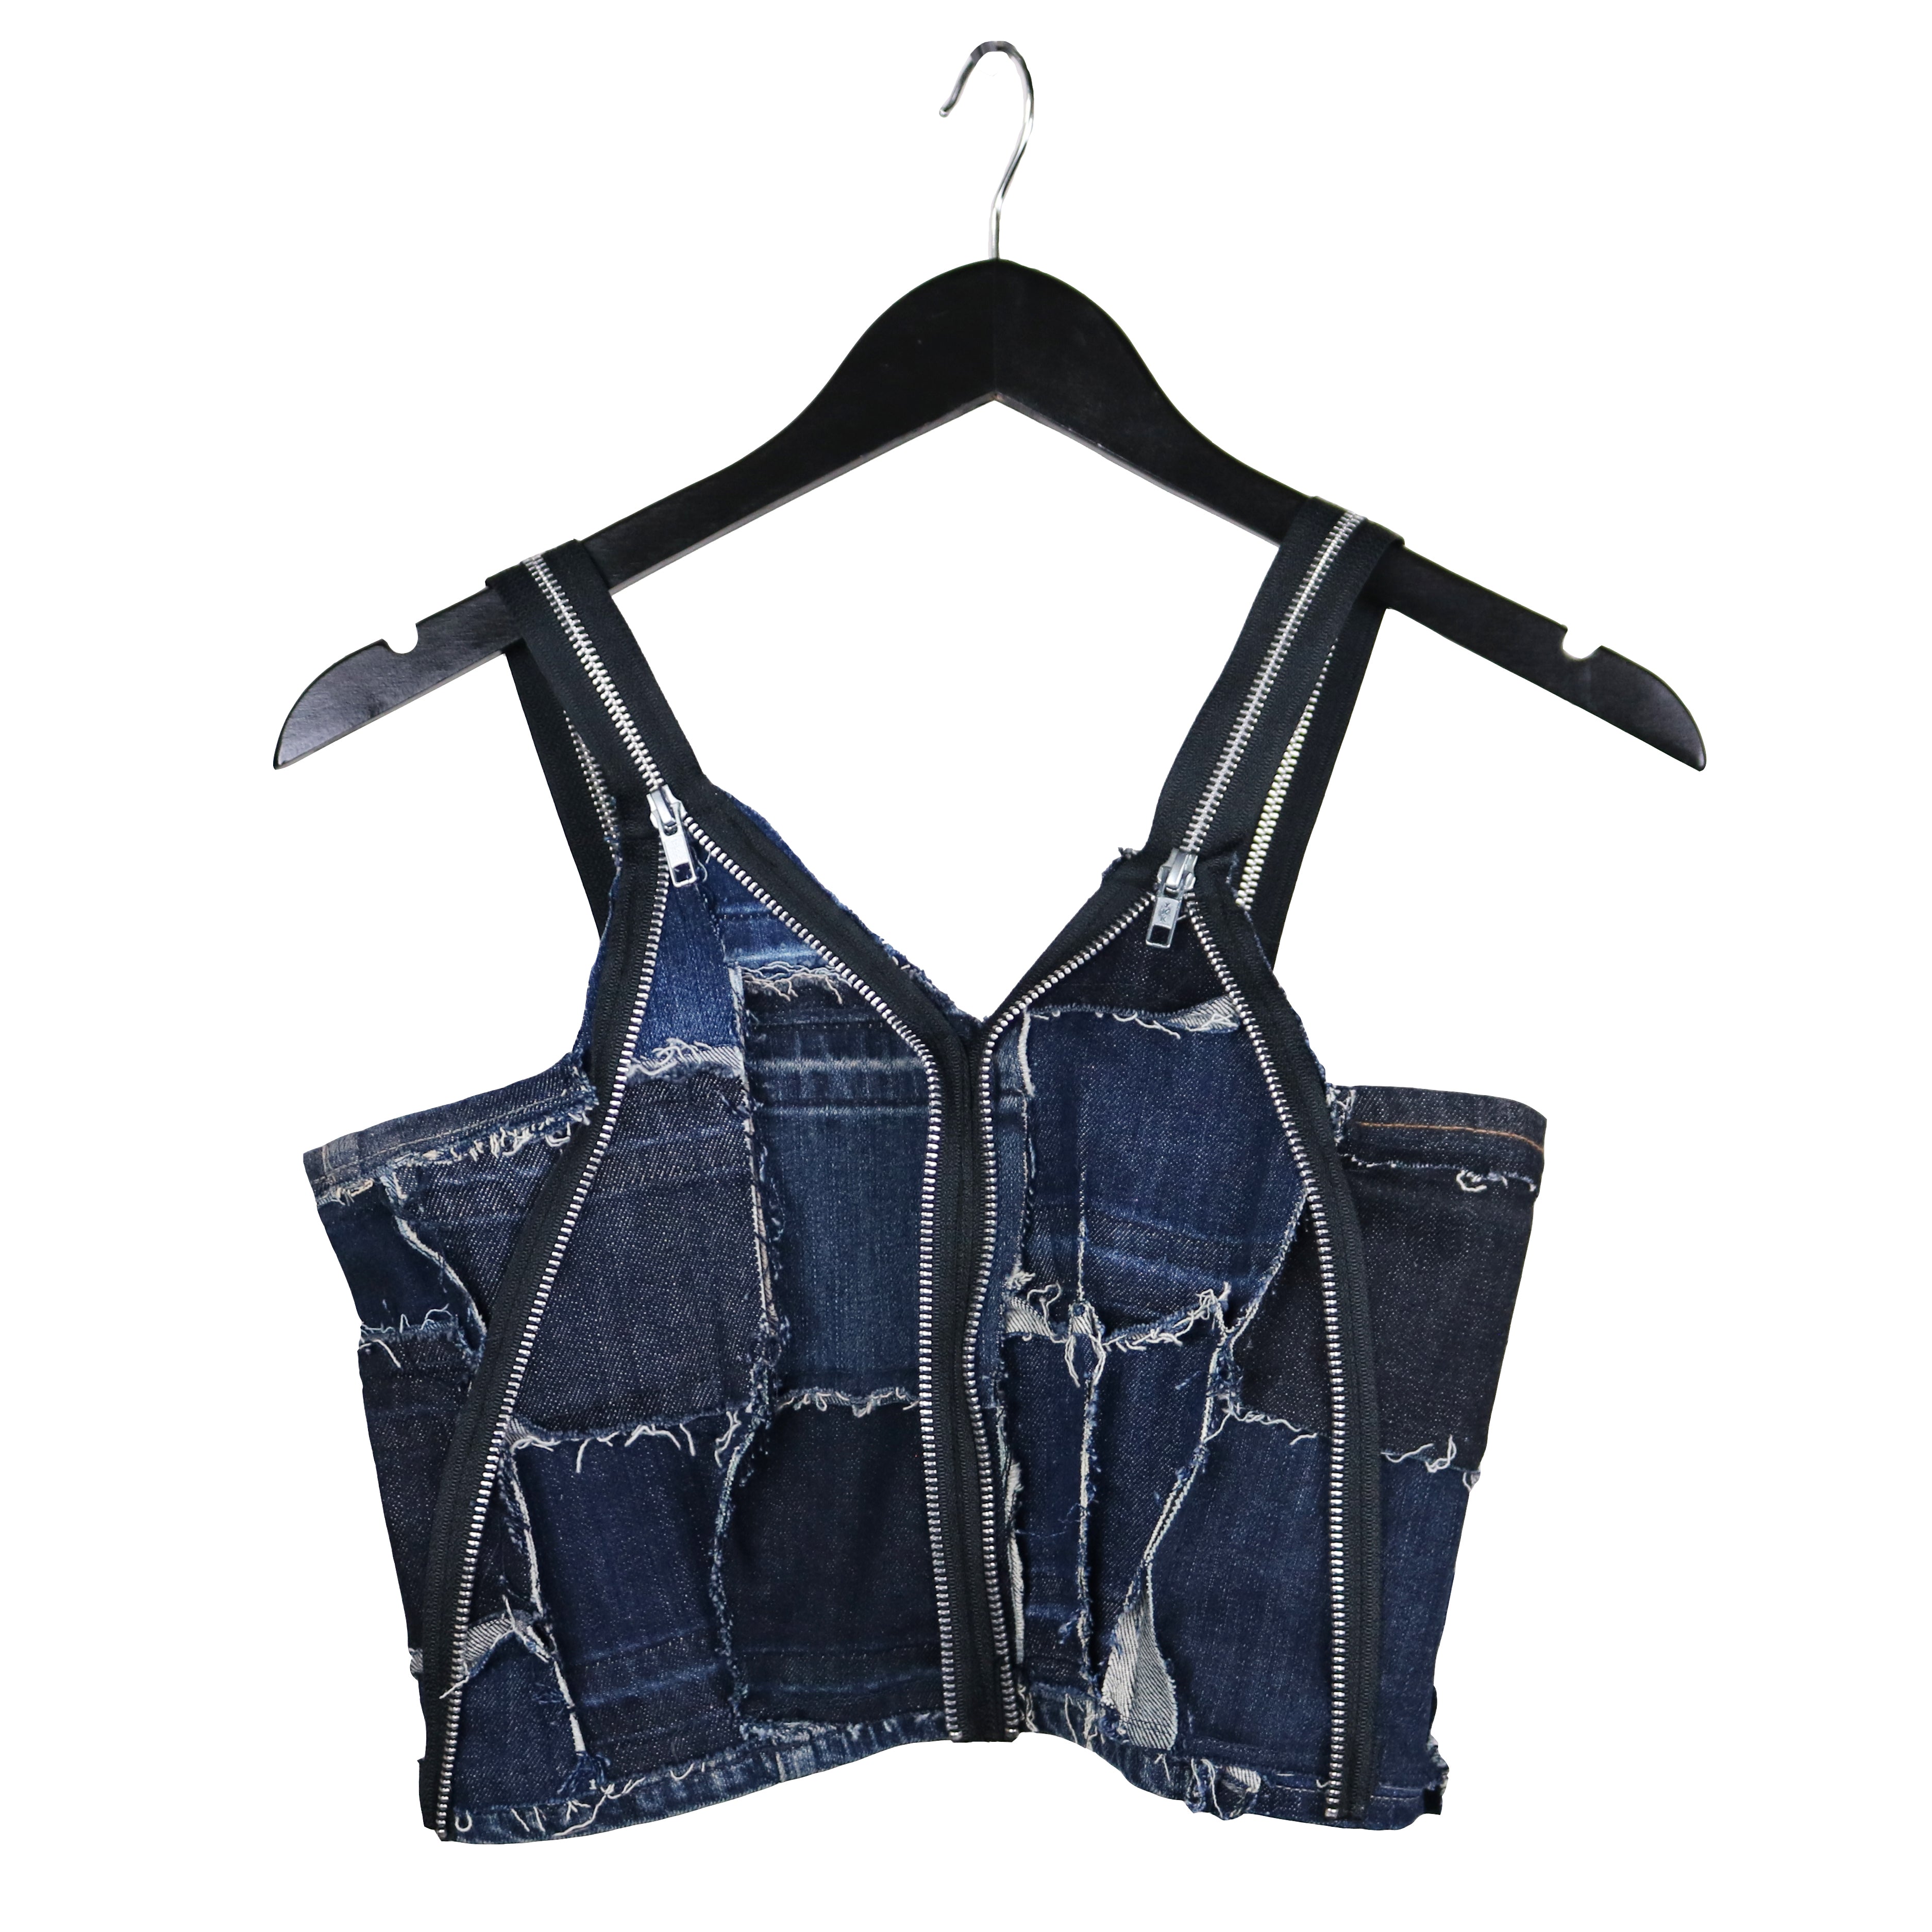 #REMIXbyStevieLeigh reversible upcycled denim crop top with zippers